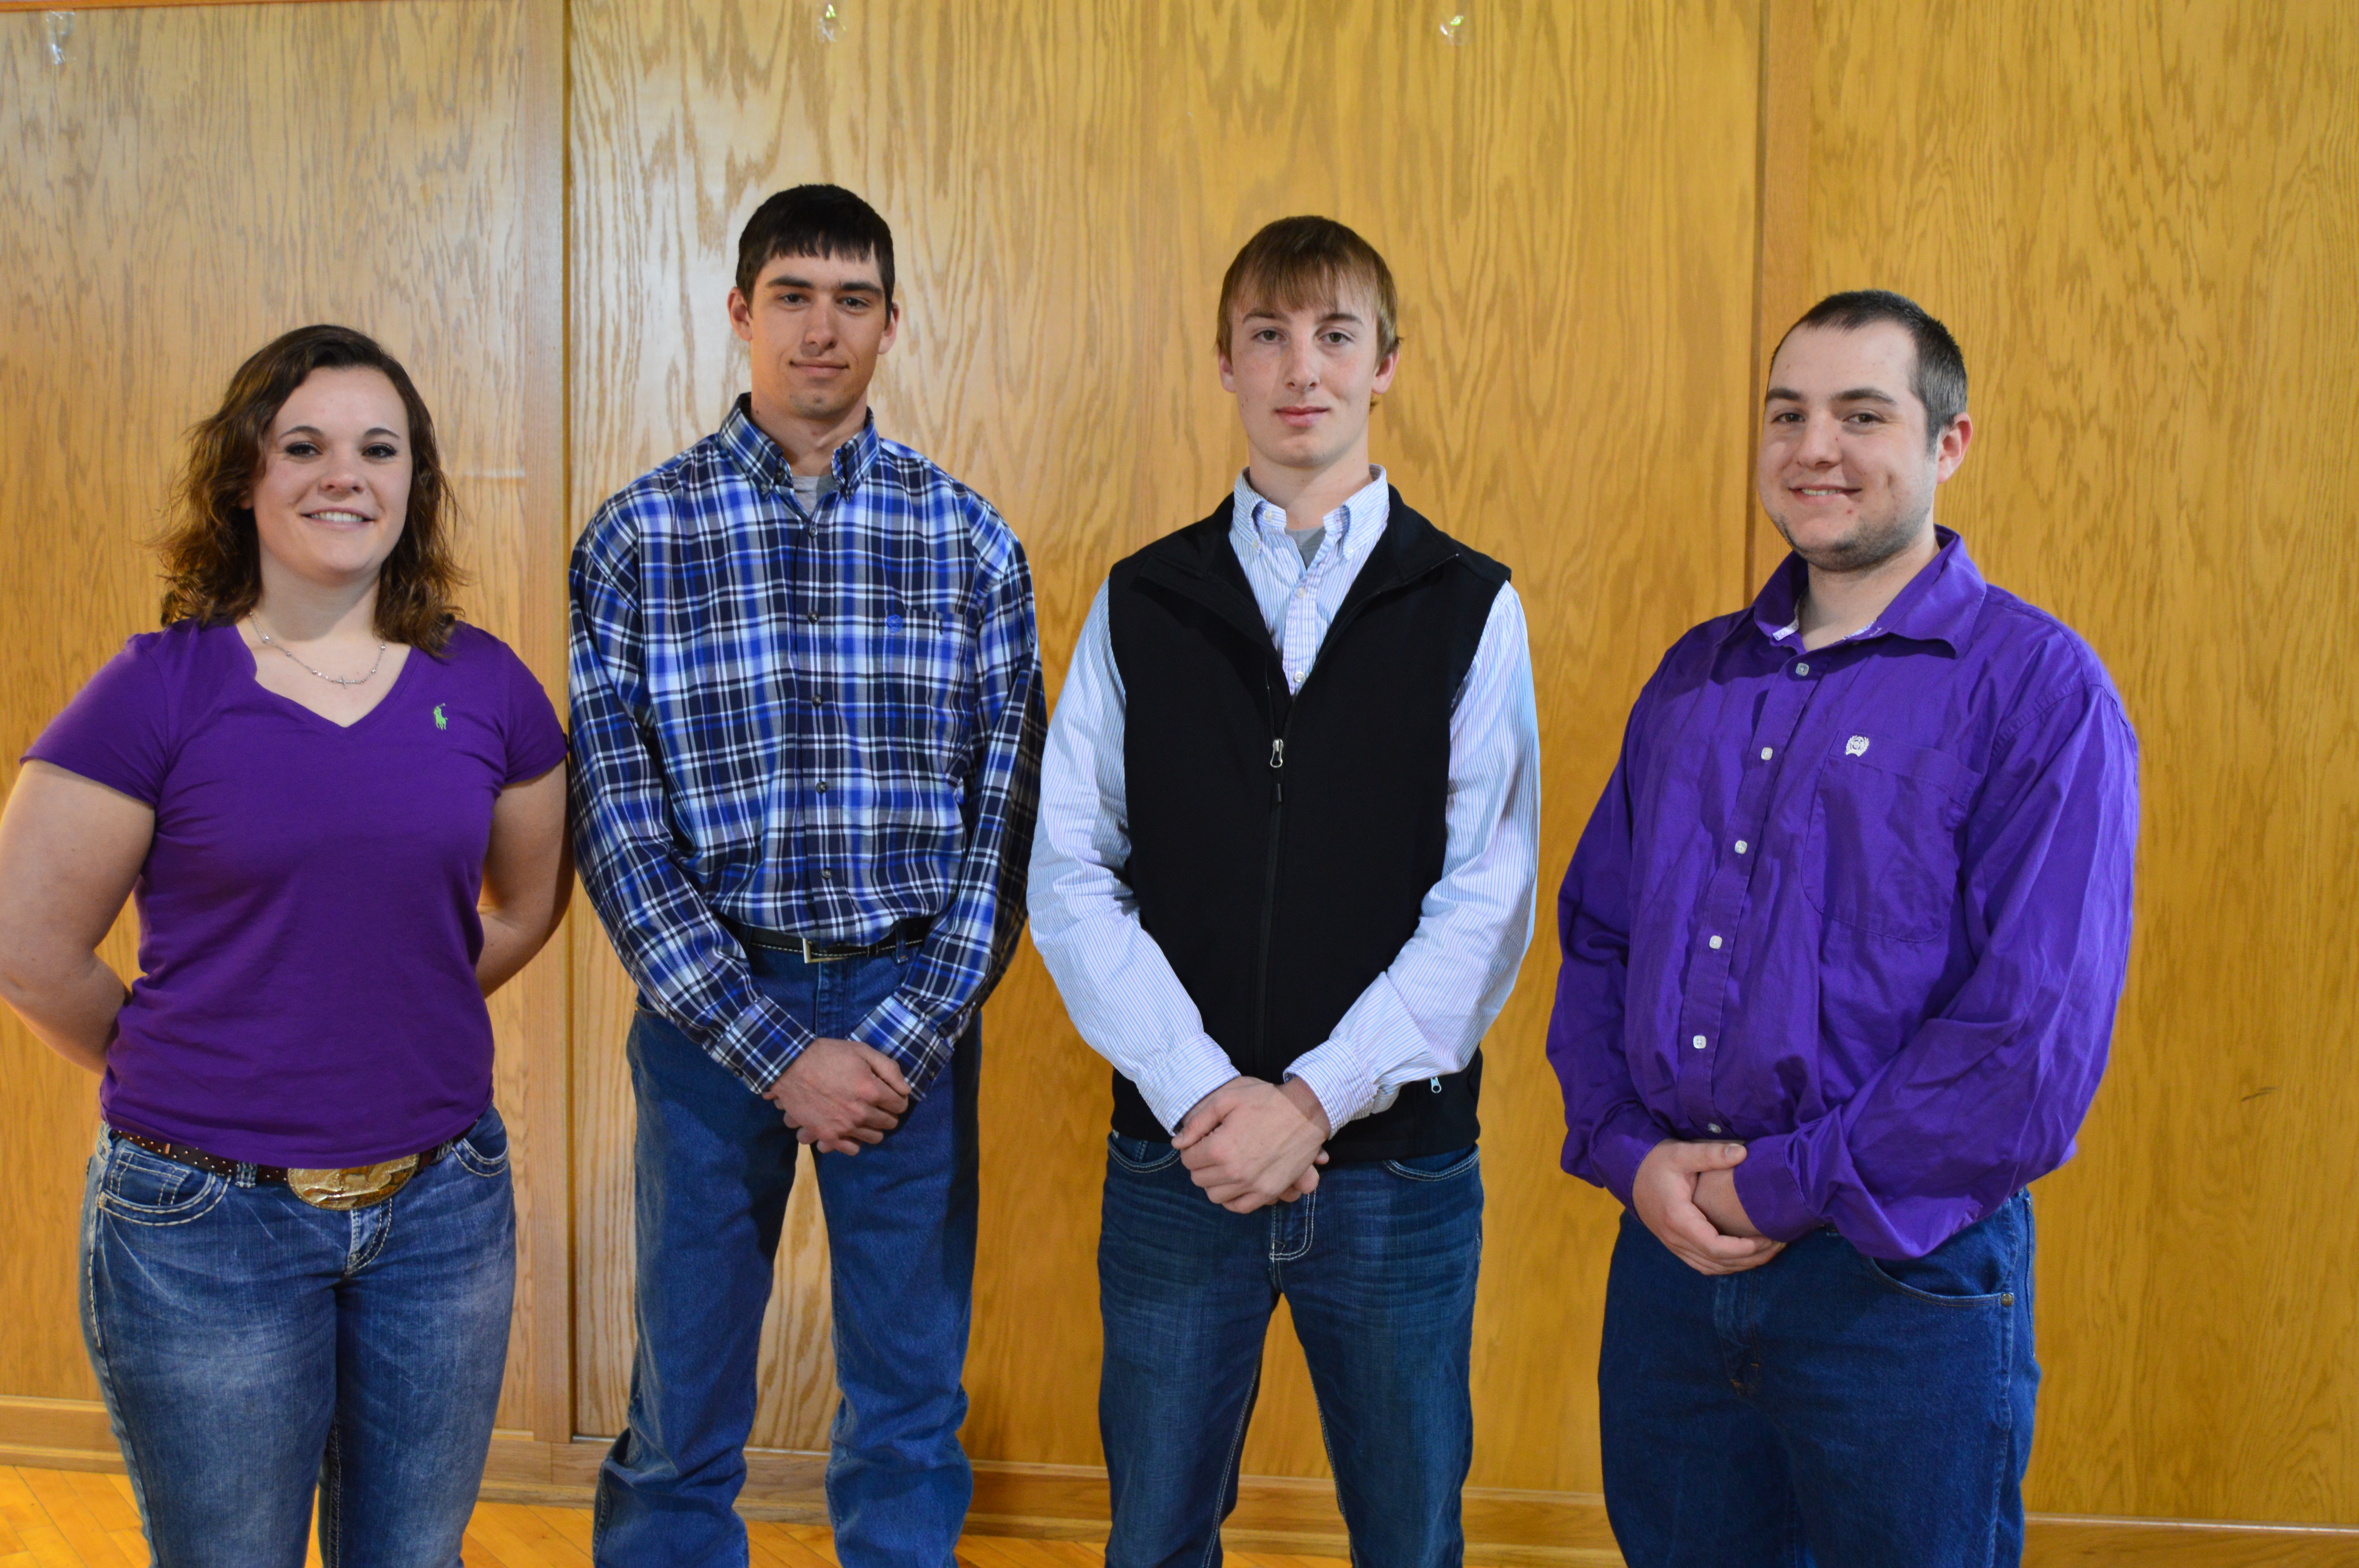 NCTA Heifer Link Awards for 2016 go to (left to right) Bailey Hinrichs, Ayr; Raymond Fleer, Pierce; Wade Vallery, Plattsmouth; and Dalton Johnson, Gering. They receive a bred breeding for their home herd after graduation in May.